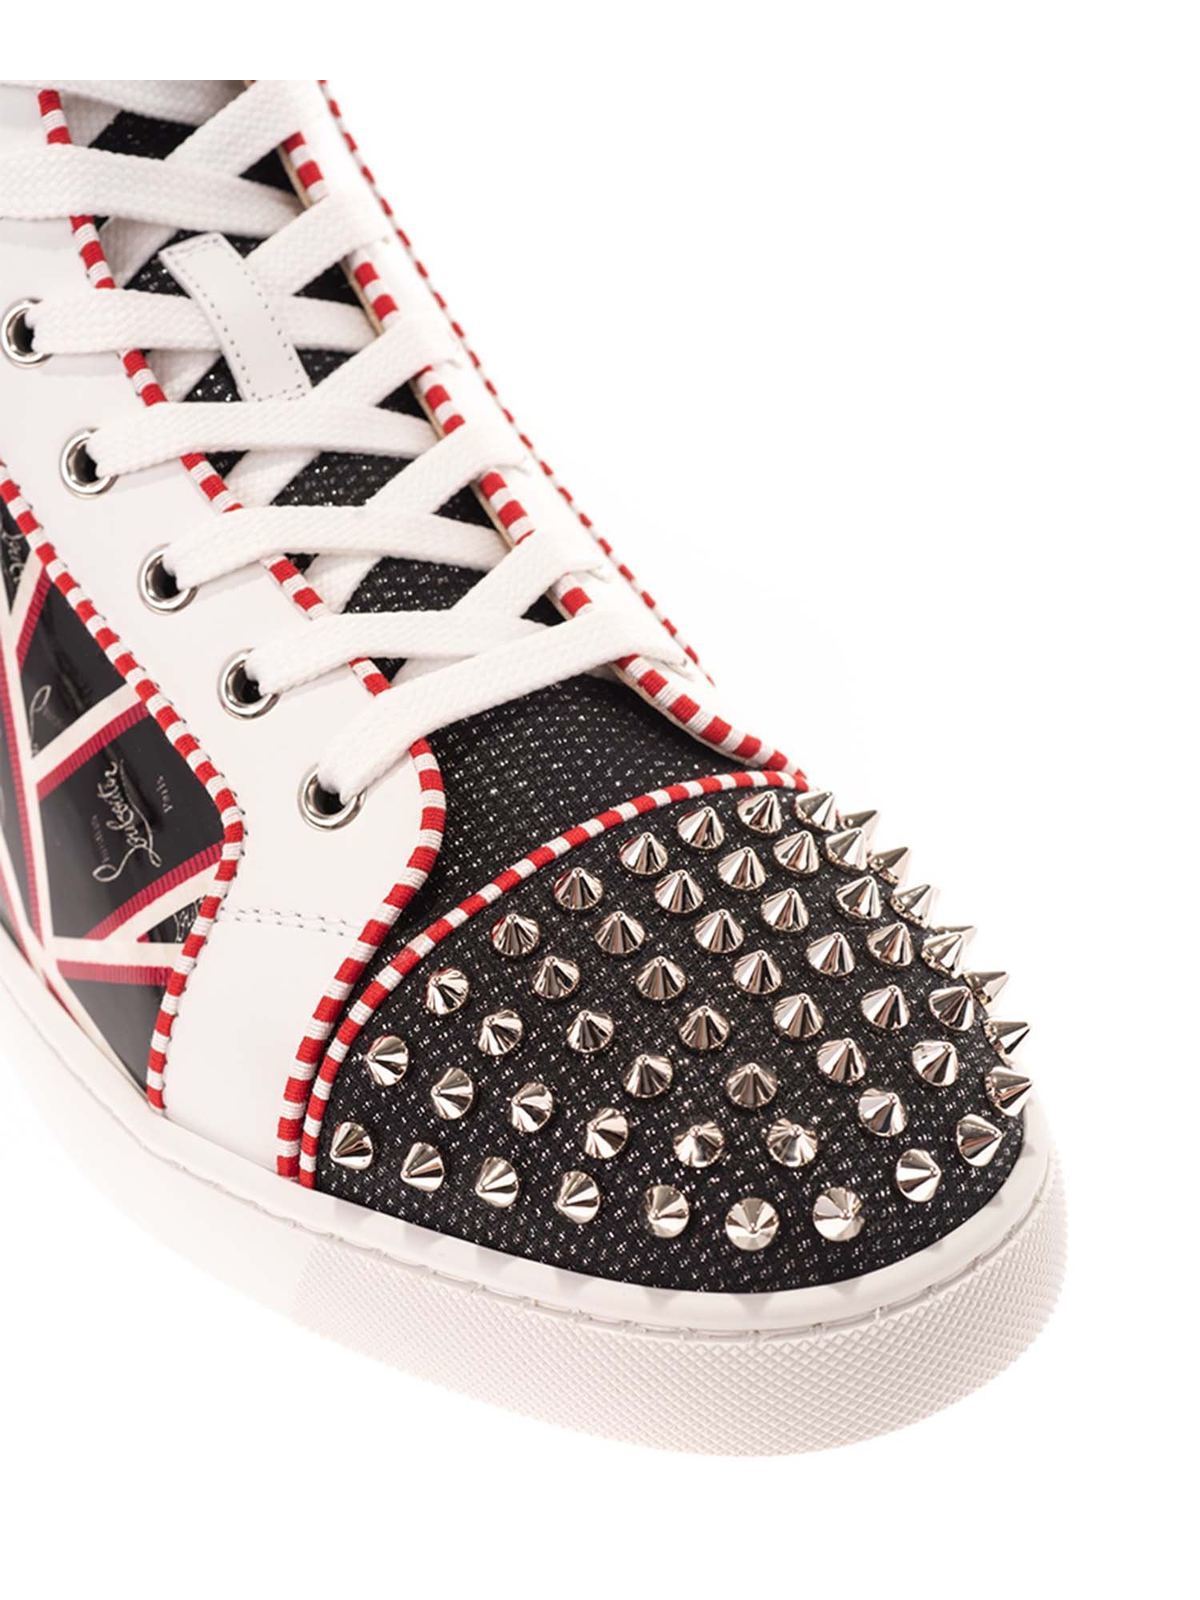 Trainers Christian Louboutin Lou Spikes Orlato sneakers in red and - 3200959CMA3